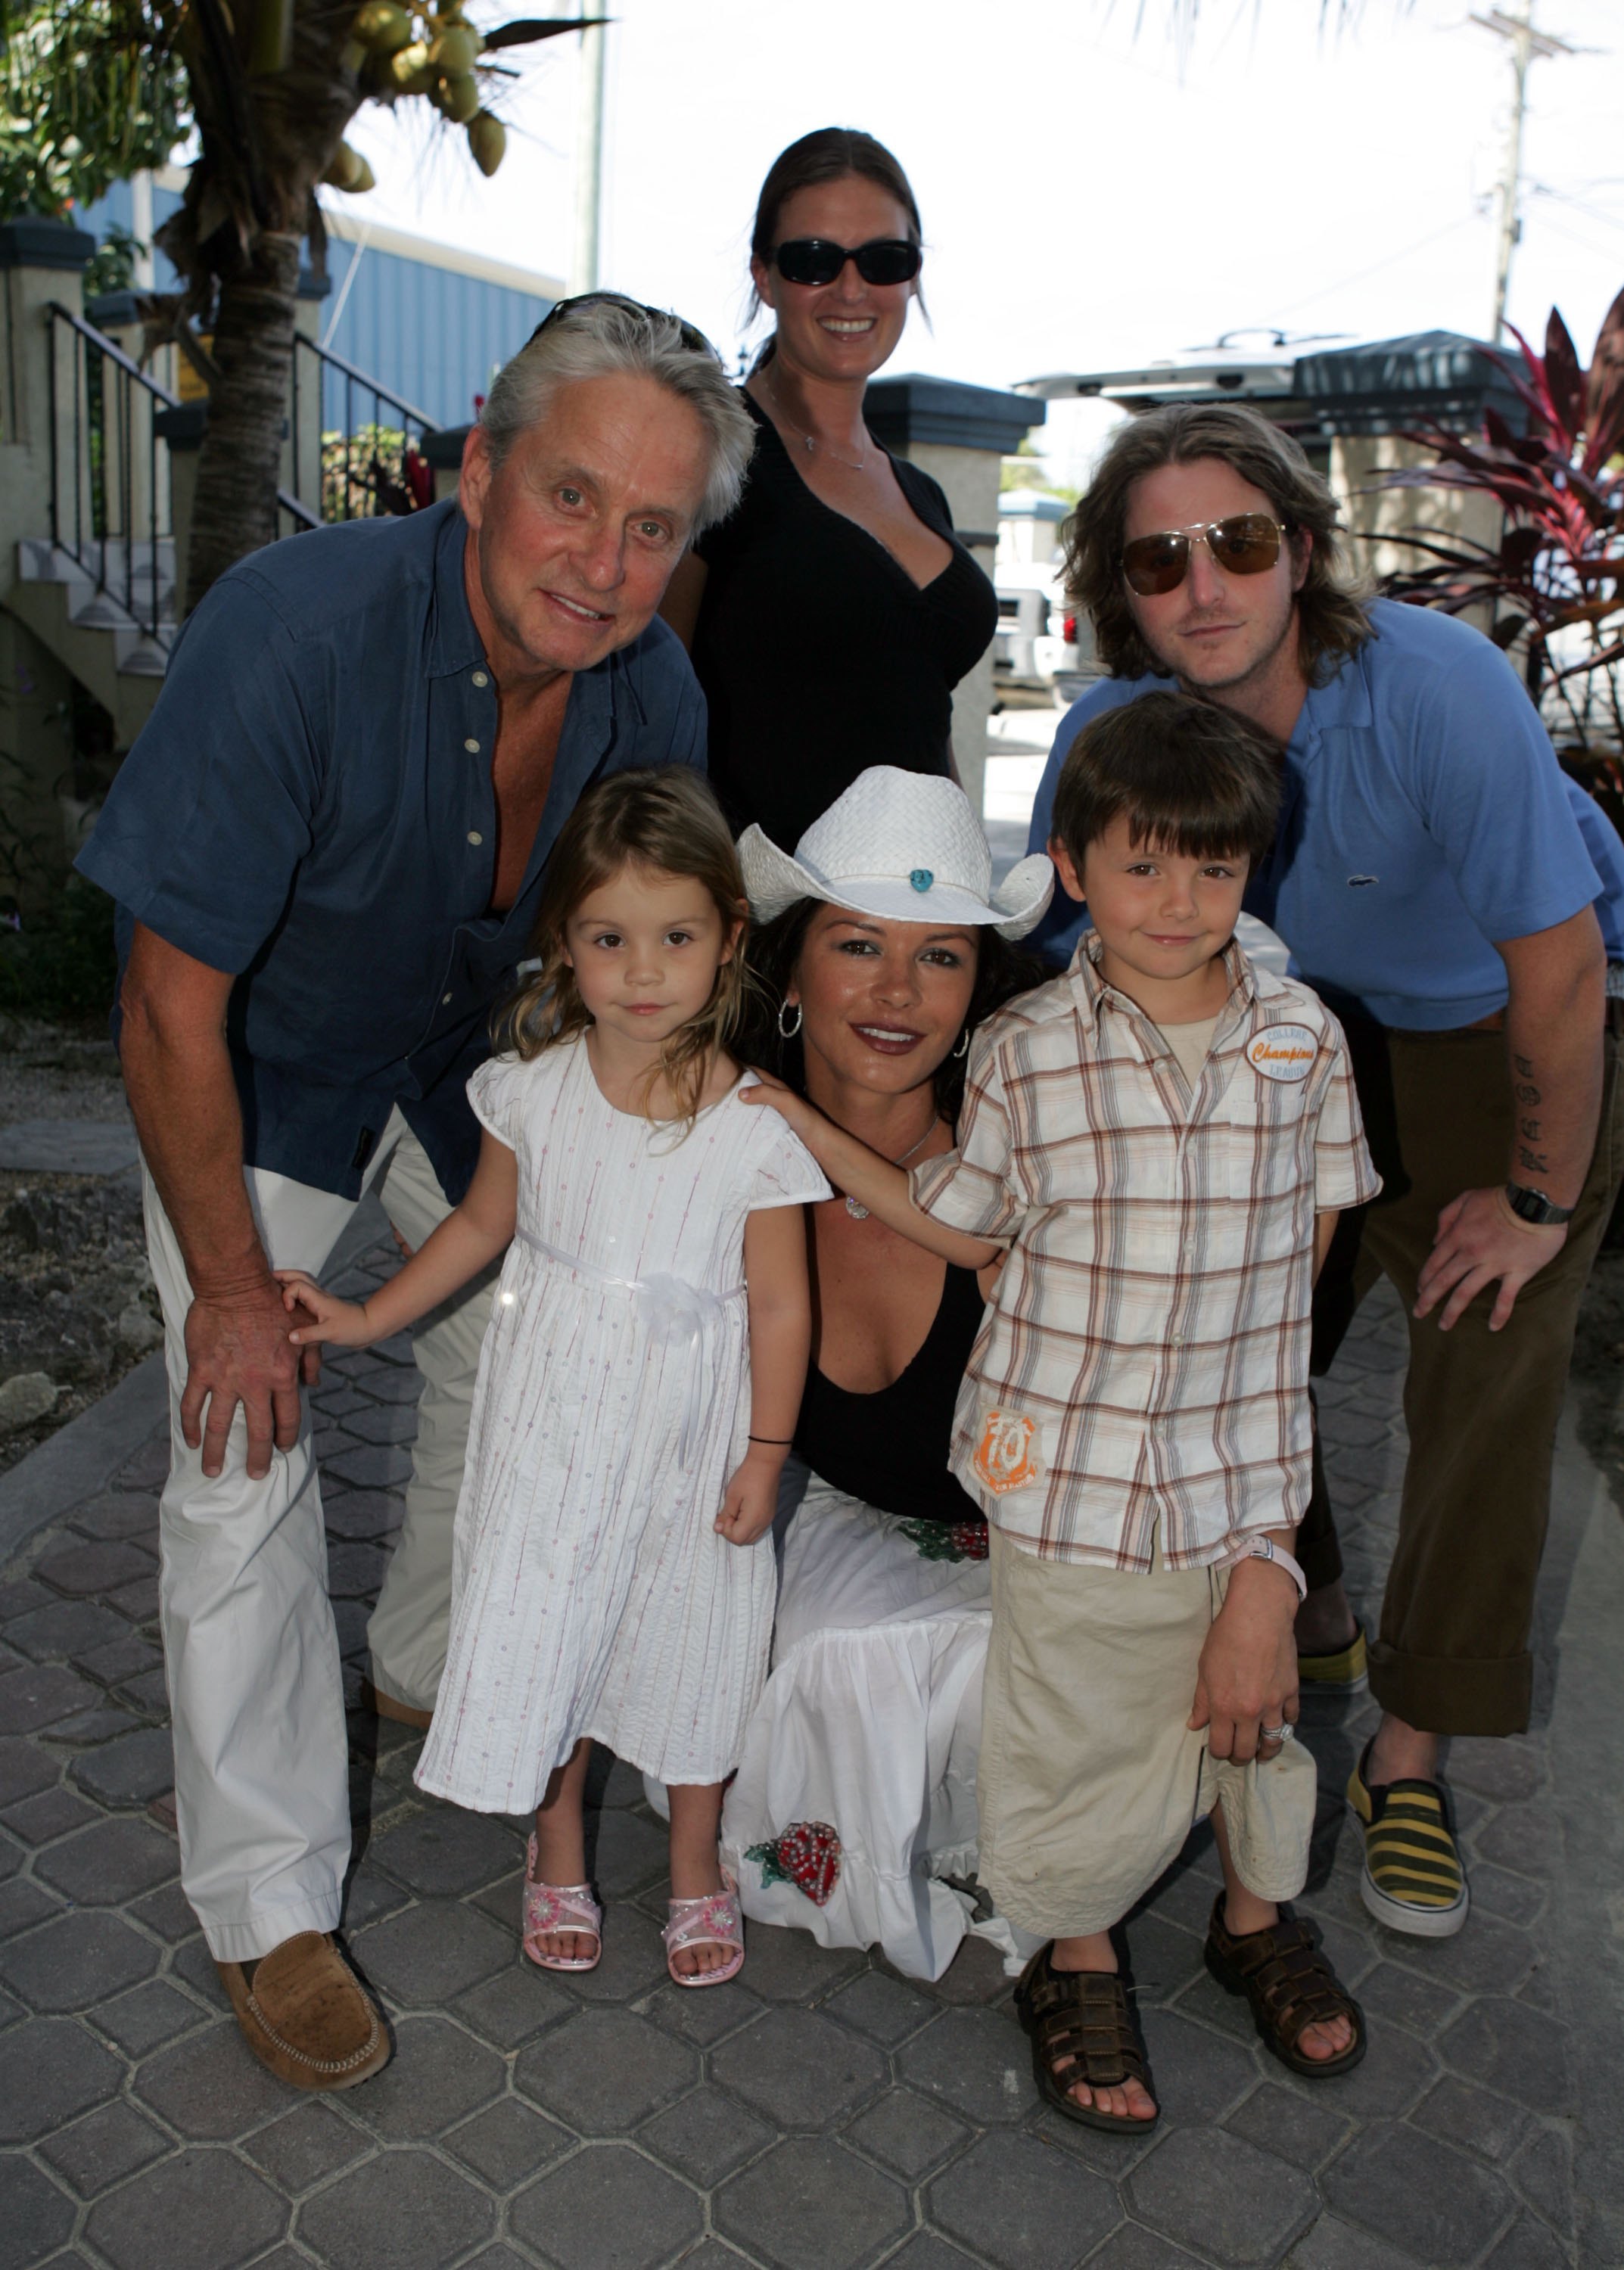 <p>Michael Douglas and wife Catherine Zeta-Jones are pictured with their two kids -- daughter Carys, then 3, and son Dylan, then 6 -- as well as the Oscar-winning actor's adult son from his first marriage, Cameron Douglas, and Cameron's then-girlfriend, Kelly Scott, at Provo airport in Turks and Caicos on Jan. 5, 2007. Keep reading to see the youngest Douglas kids all grown up at Dylan's college graduation...</p>